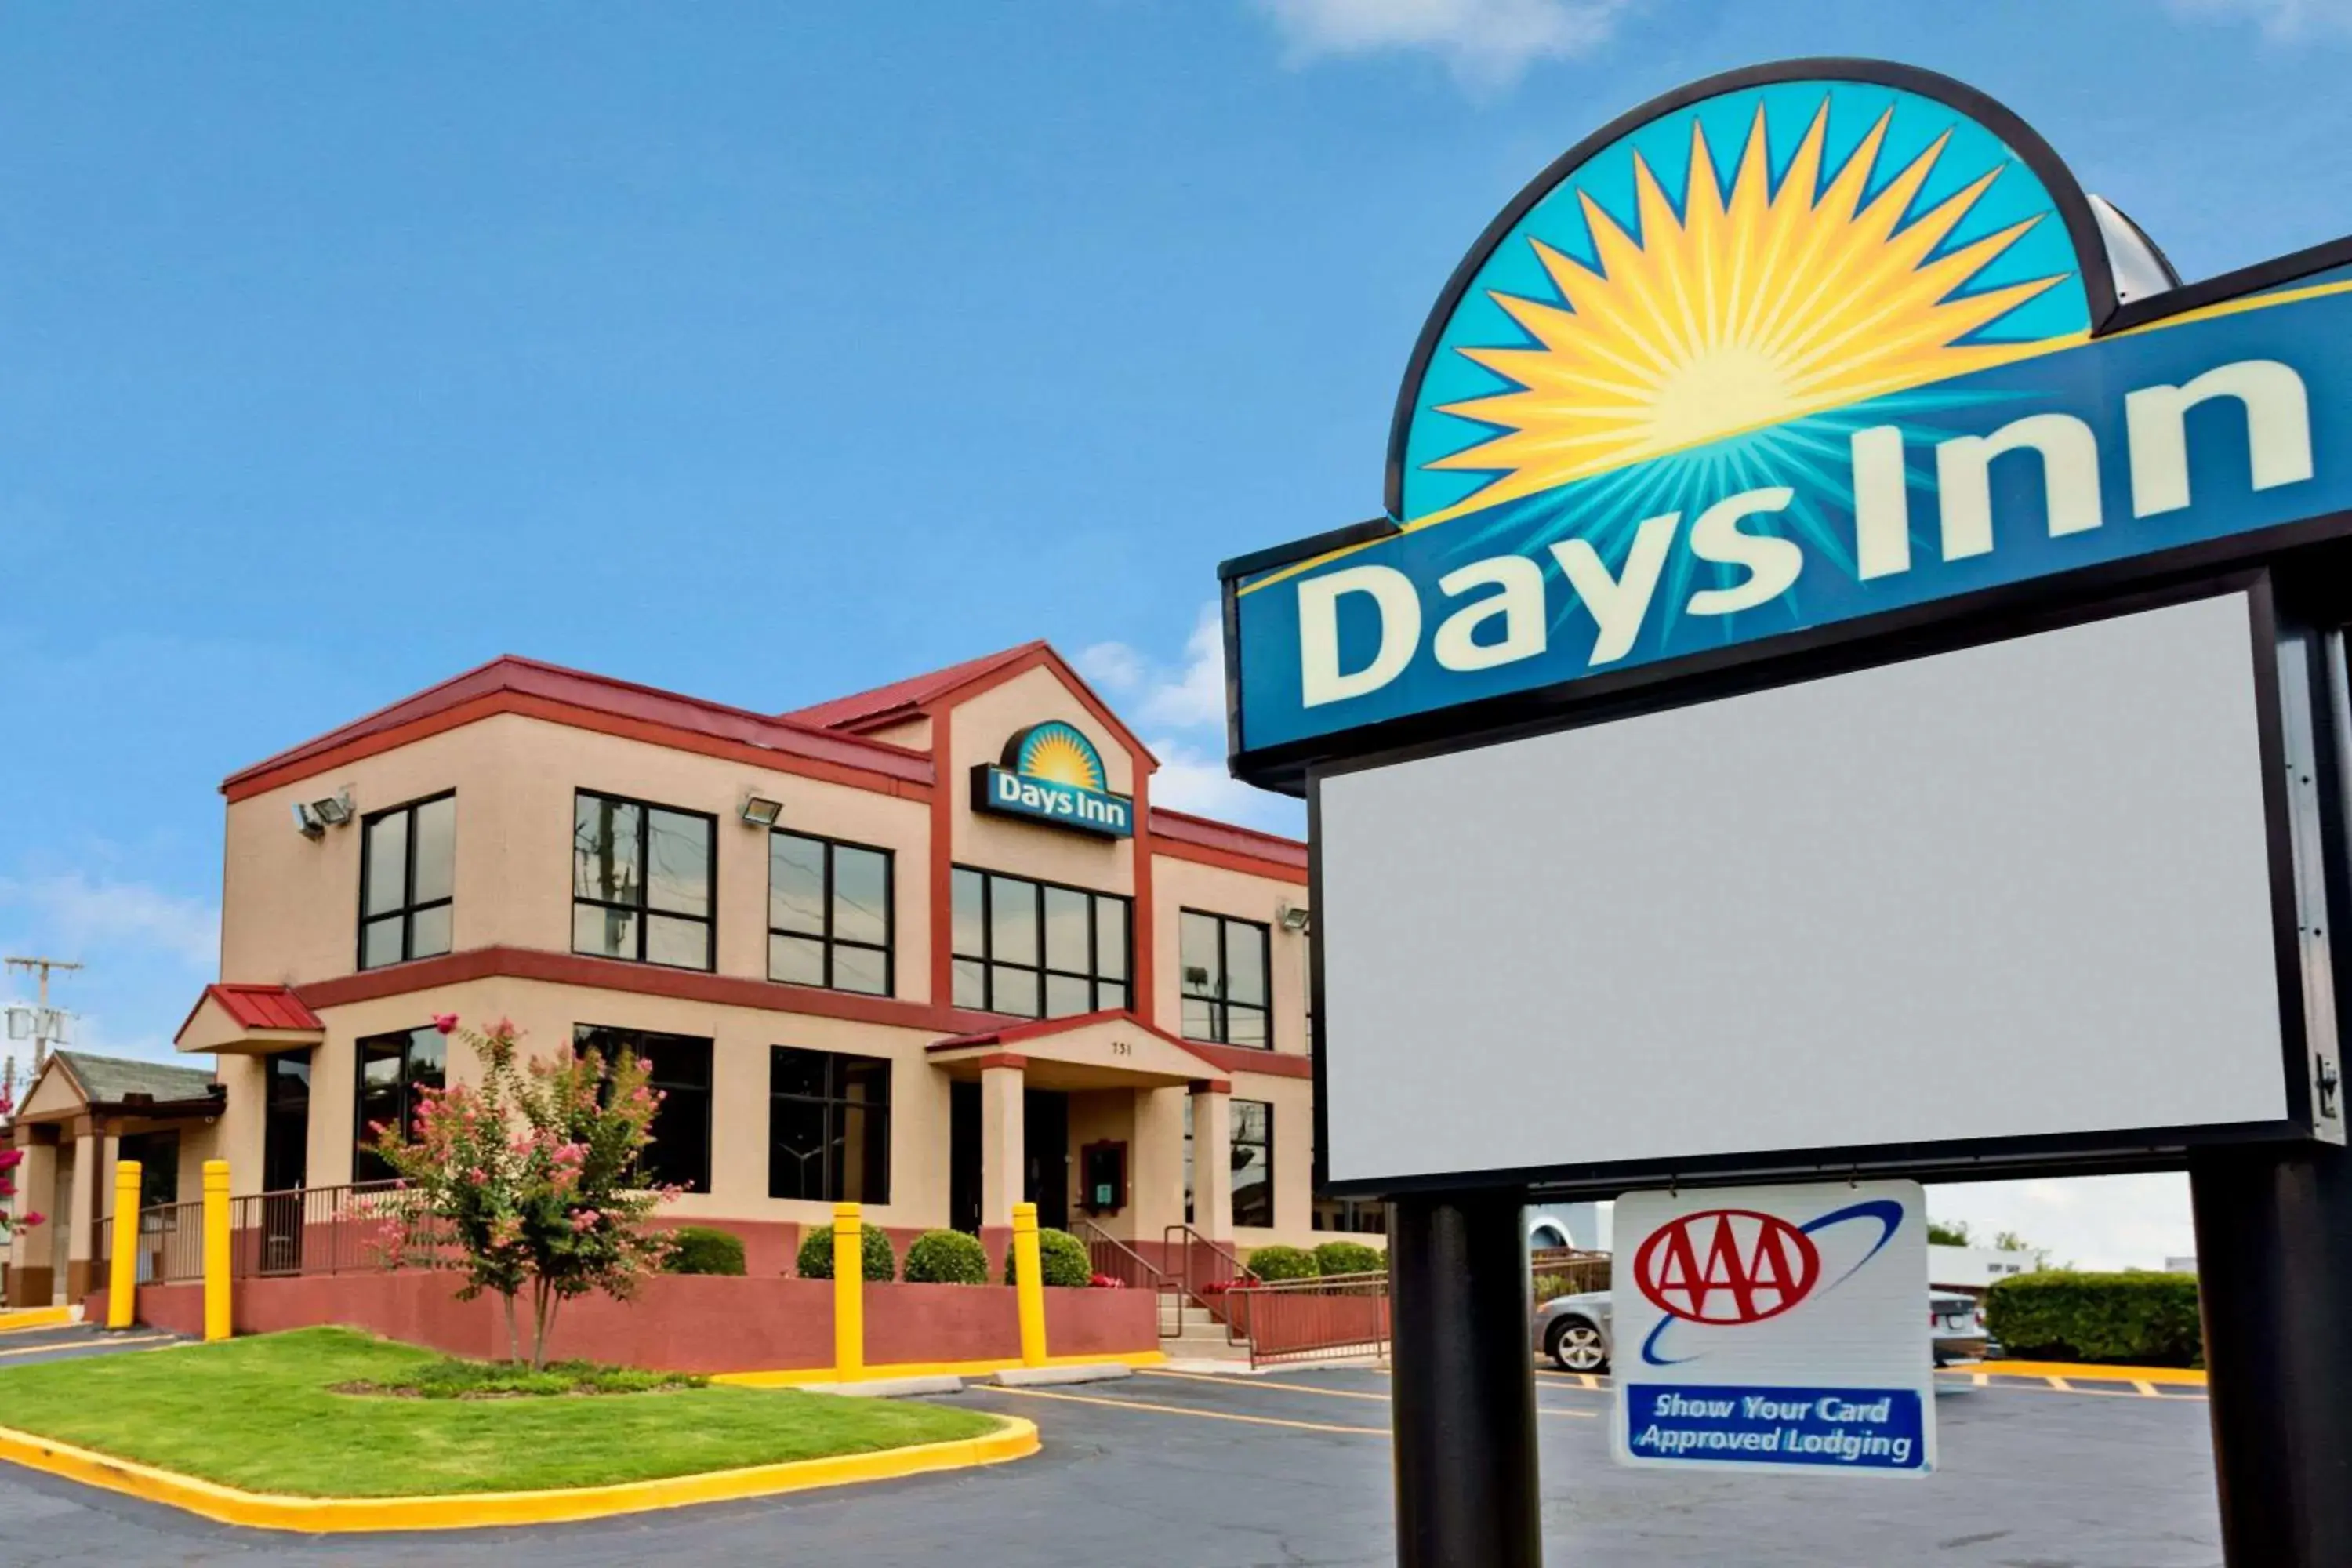 Property building in Days Inn by Wyndham Lawrenceville